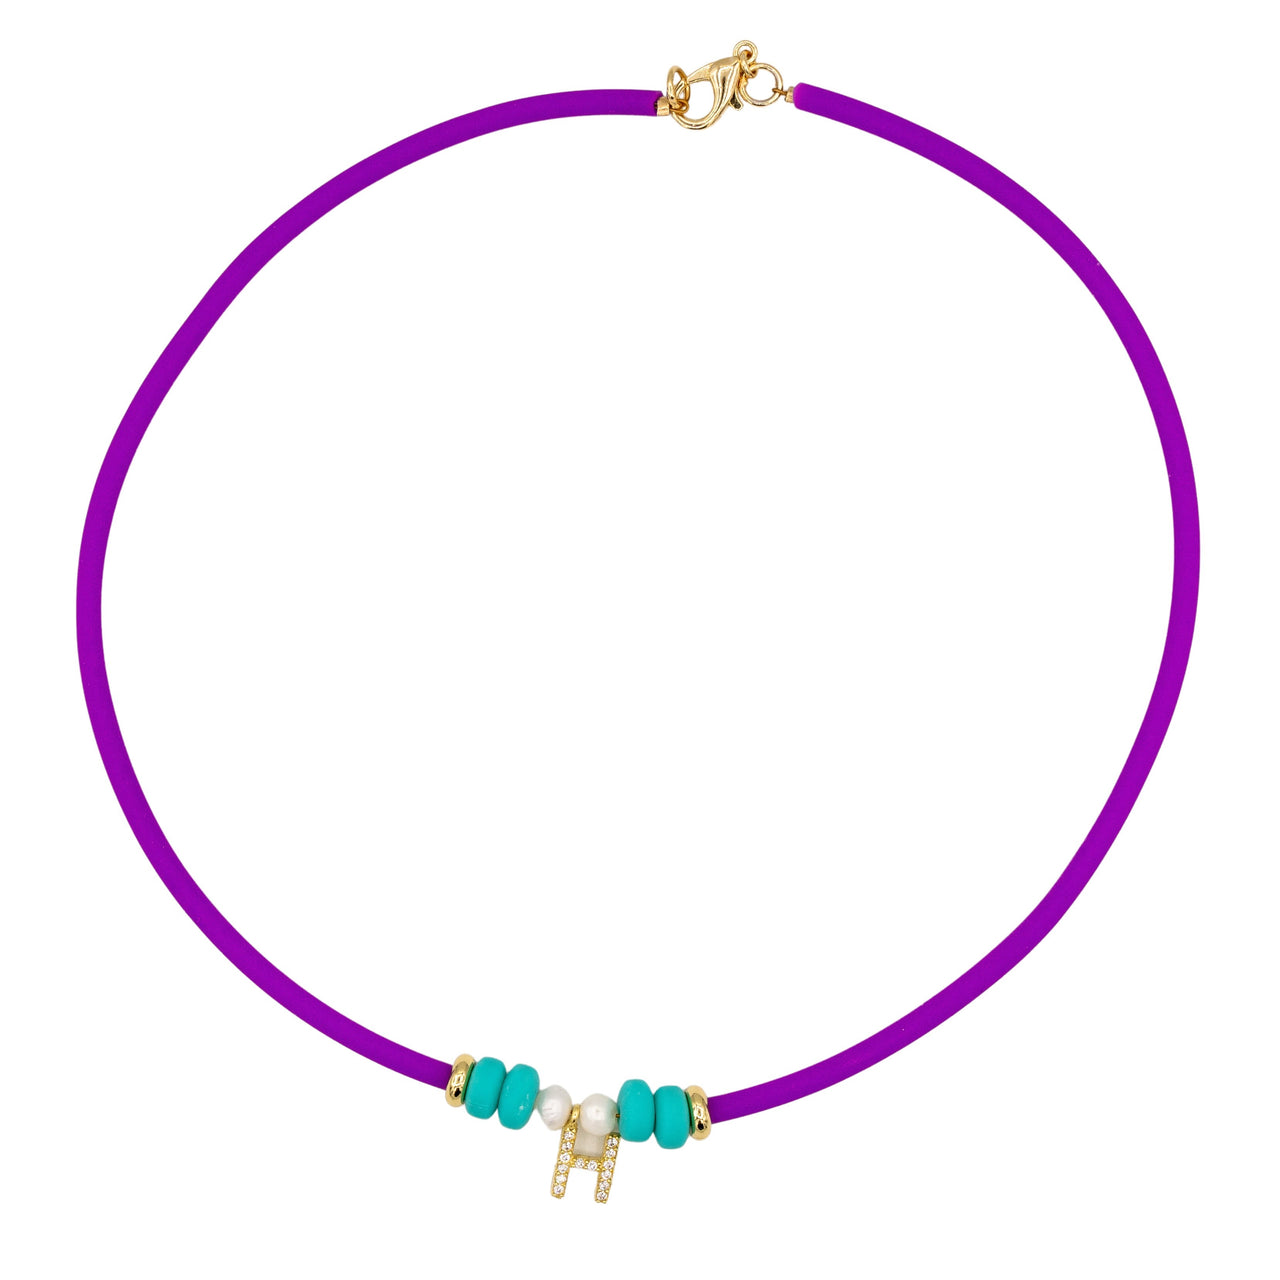 The Neon Purple Initial Necklace